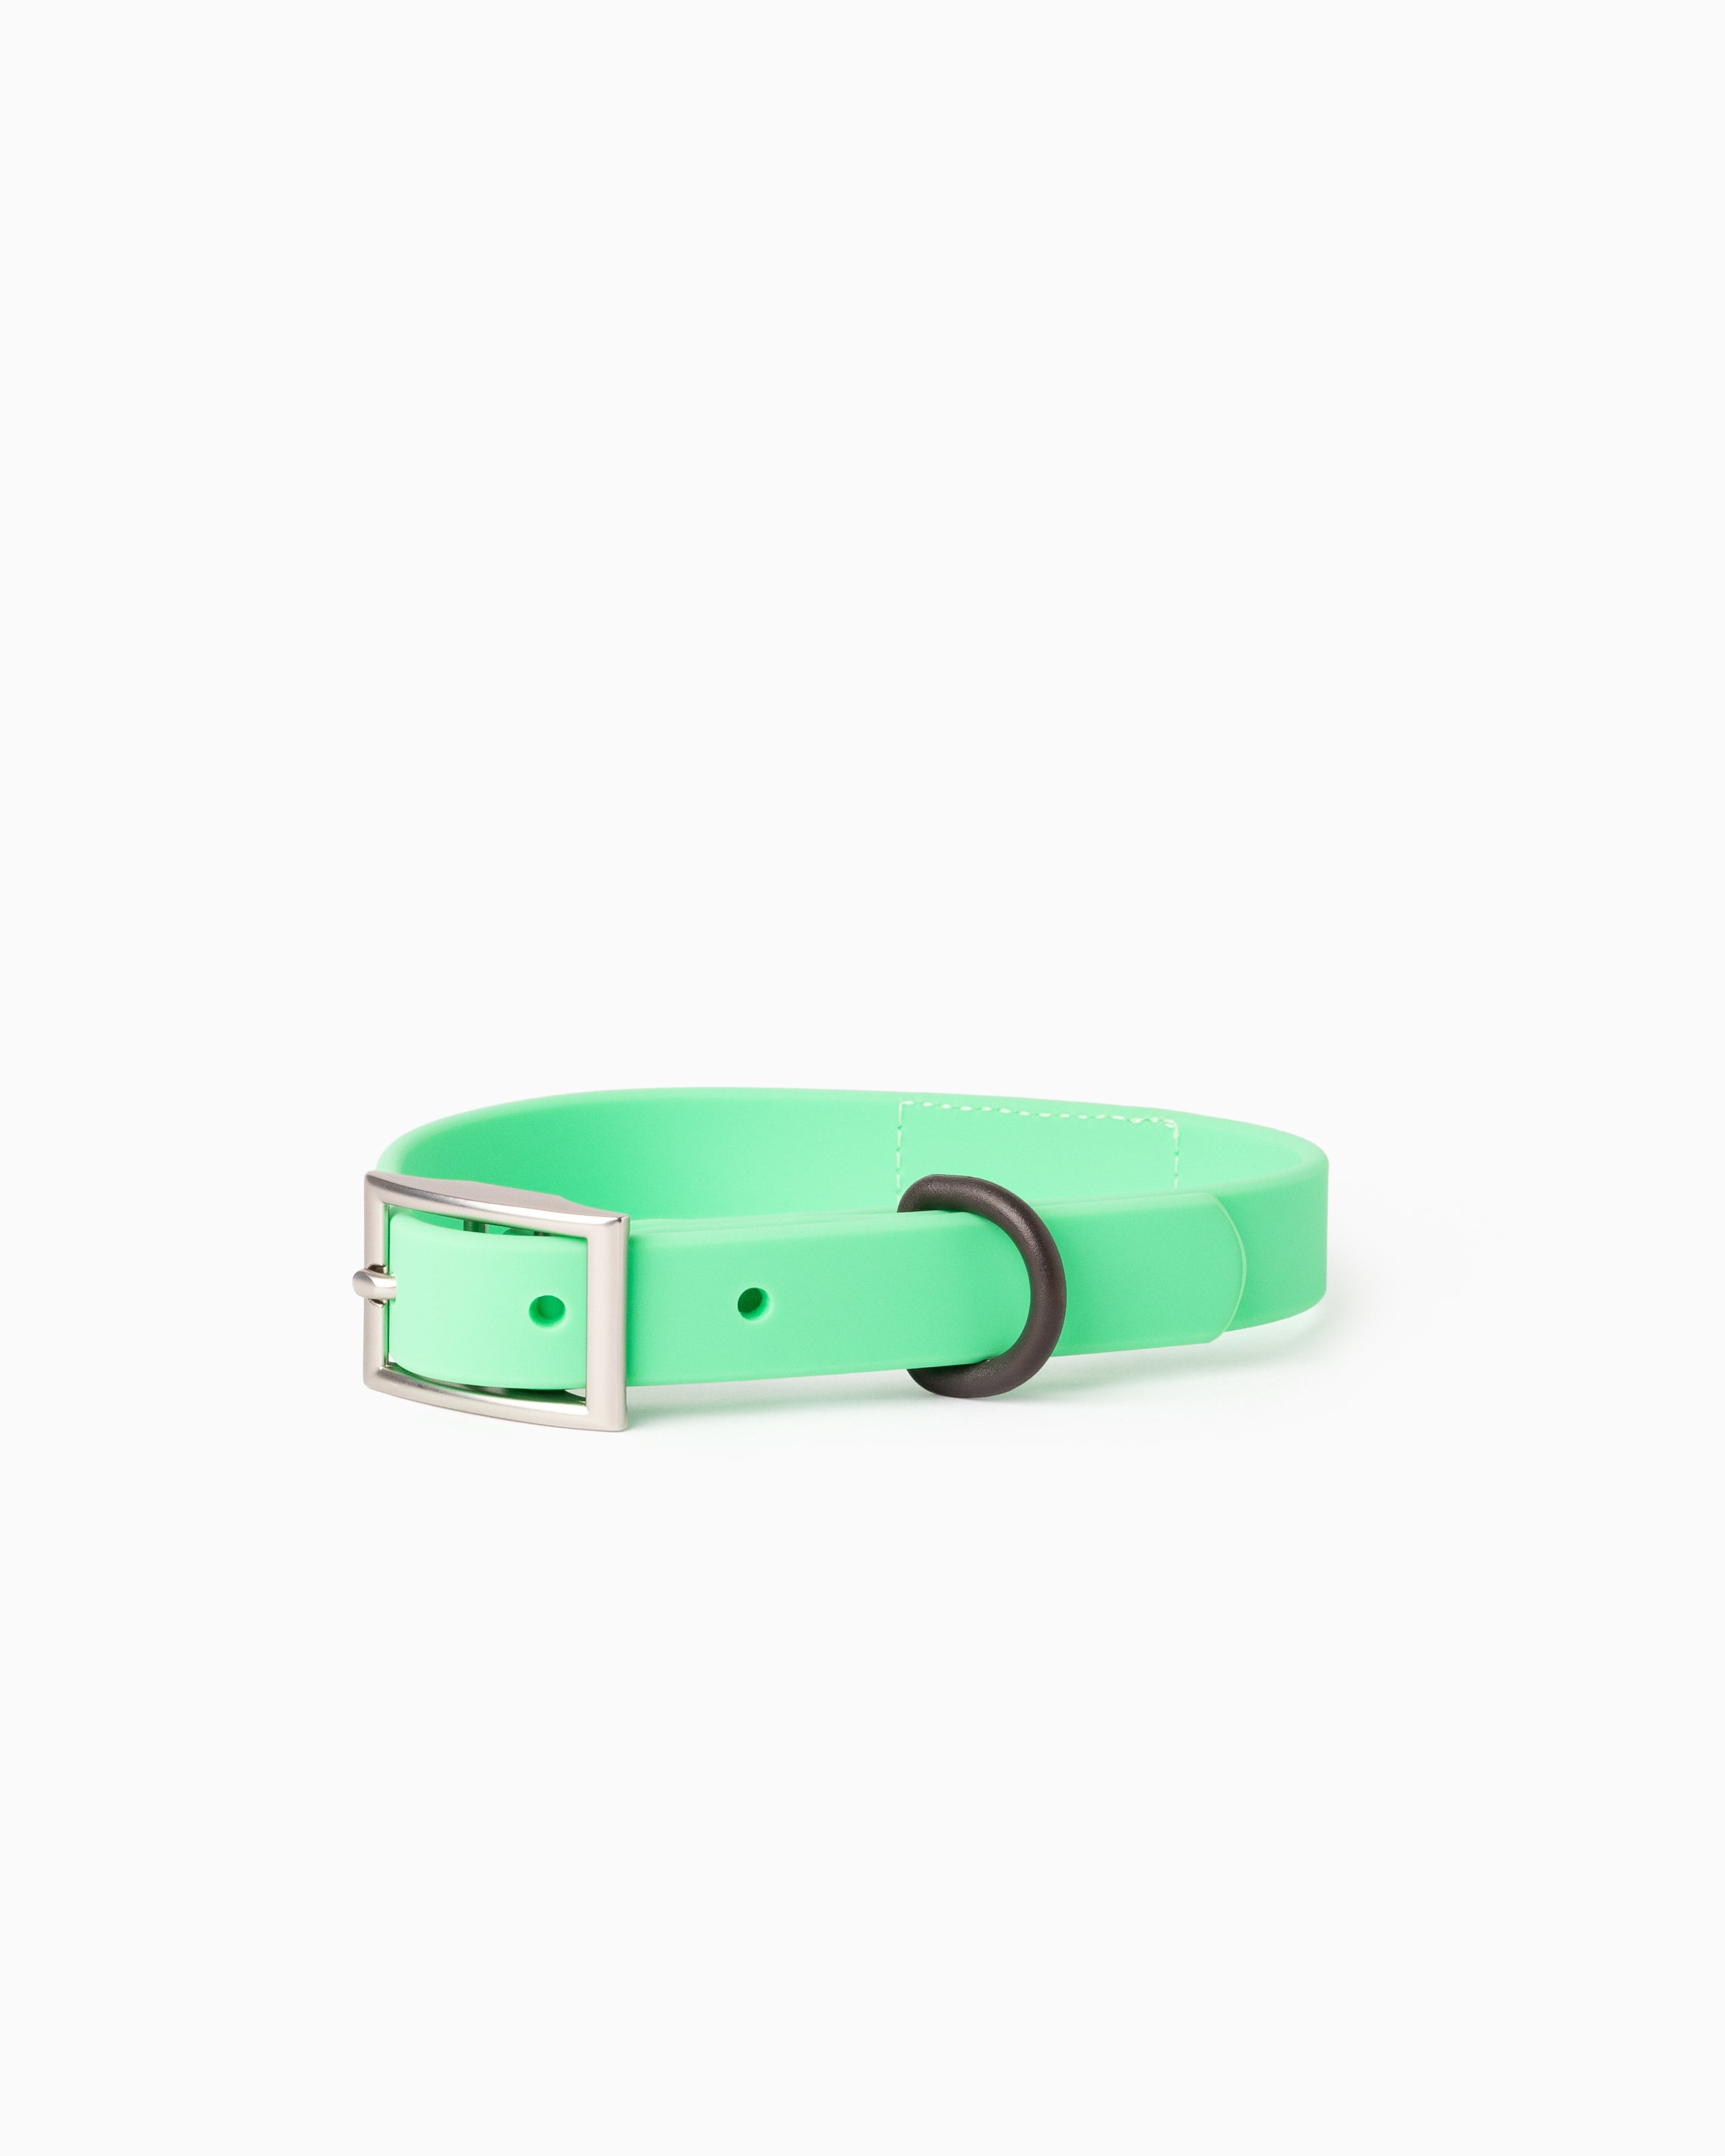 Spearmint green waterproof and odor resistant dog collar with a two tone color block design & zinc alloy buckle fastening.